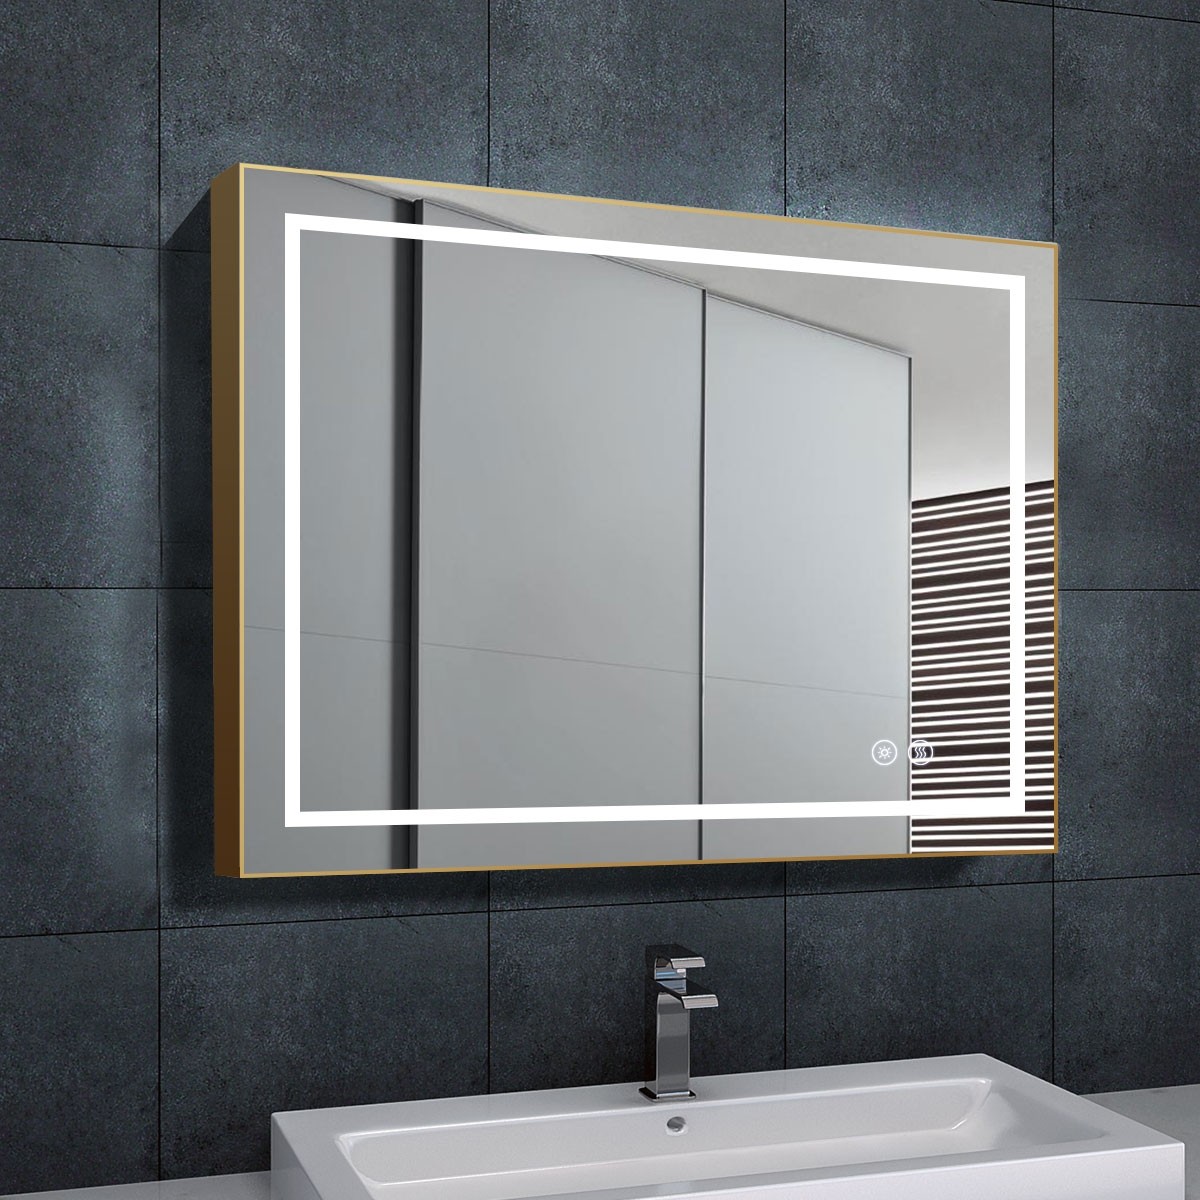 DECORAPORT 36 x 28 Inch LED Bathroom Mirror with Touch Button, Light Luxury Gold, Anti Fog, Dimmable, Vertical & Horizontal Mount (D713-3628)